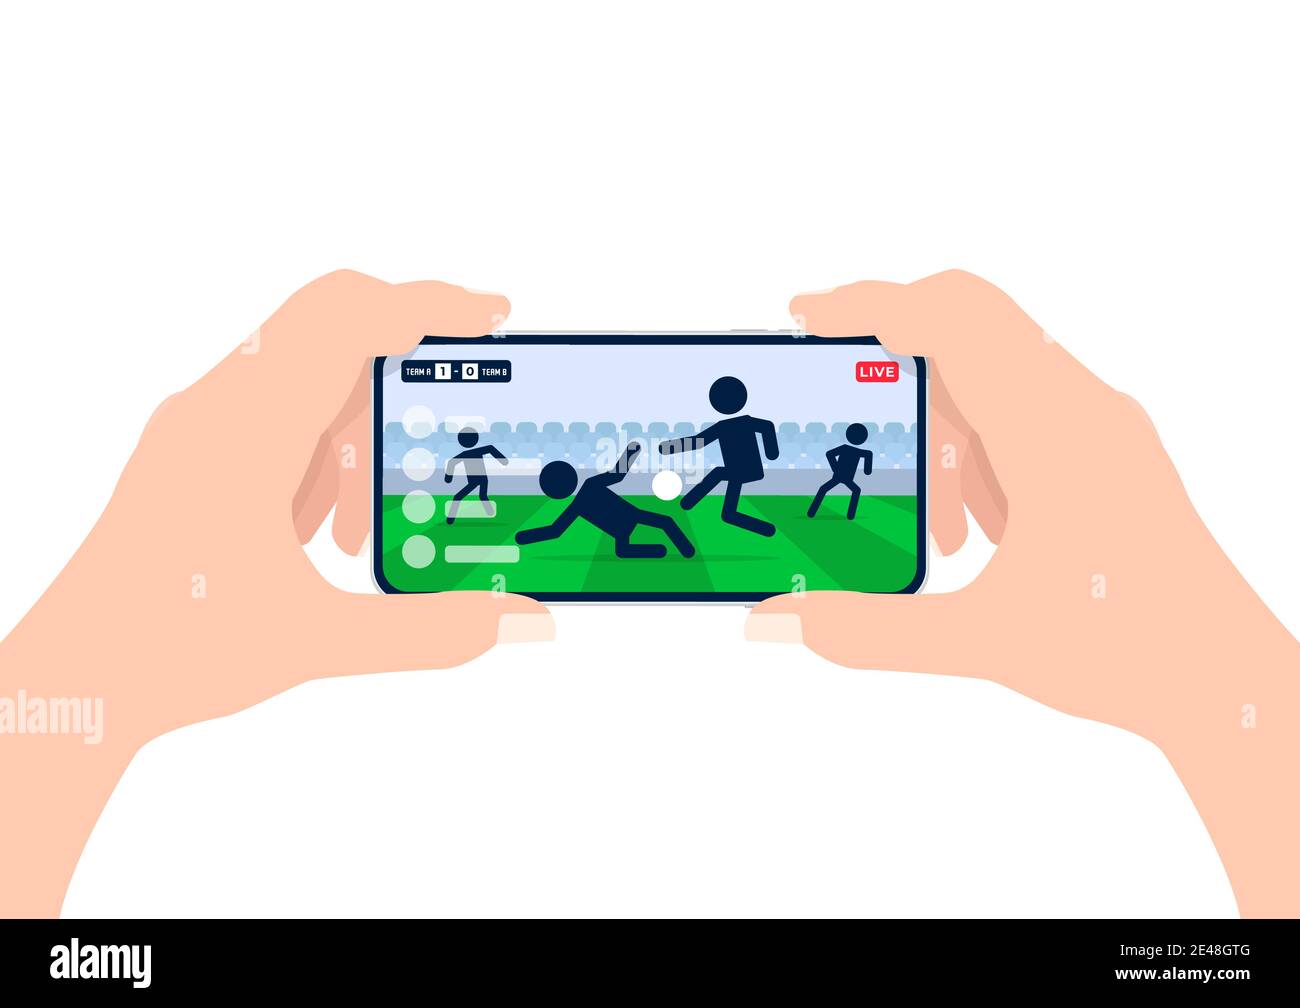 Soccer or football league live streaming on mobile phone